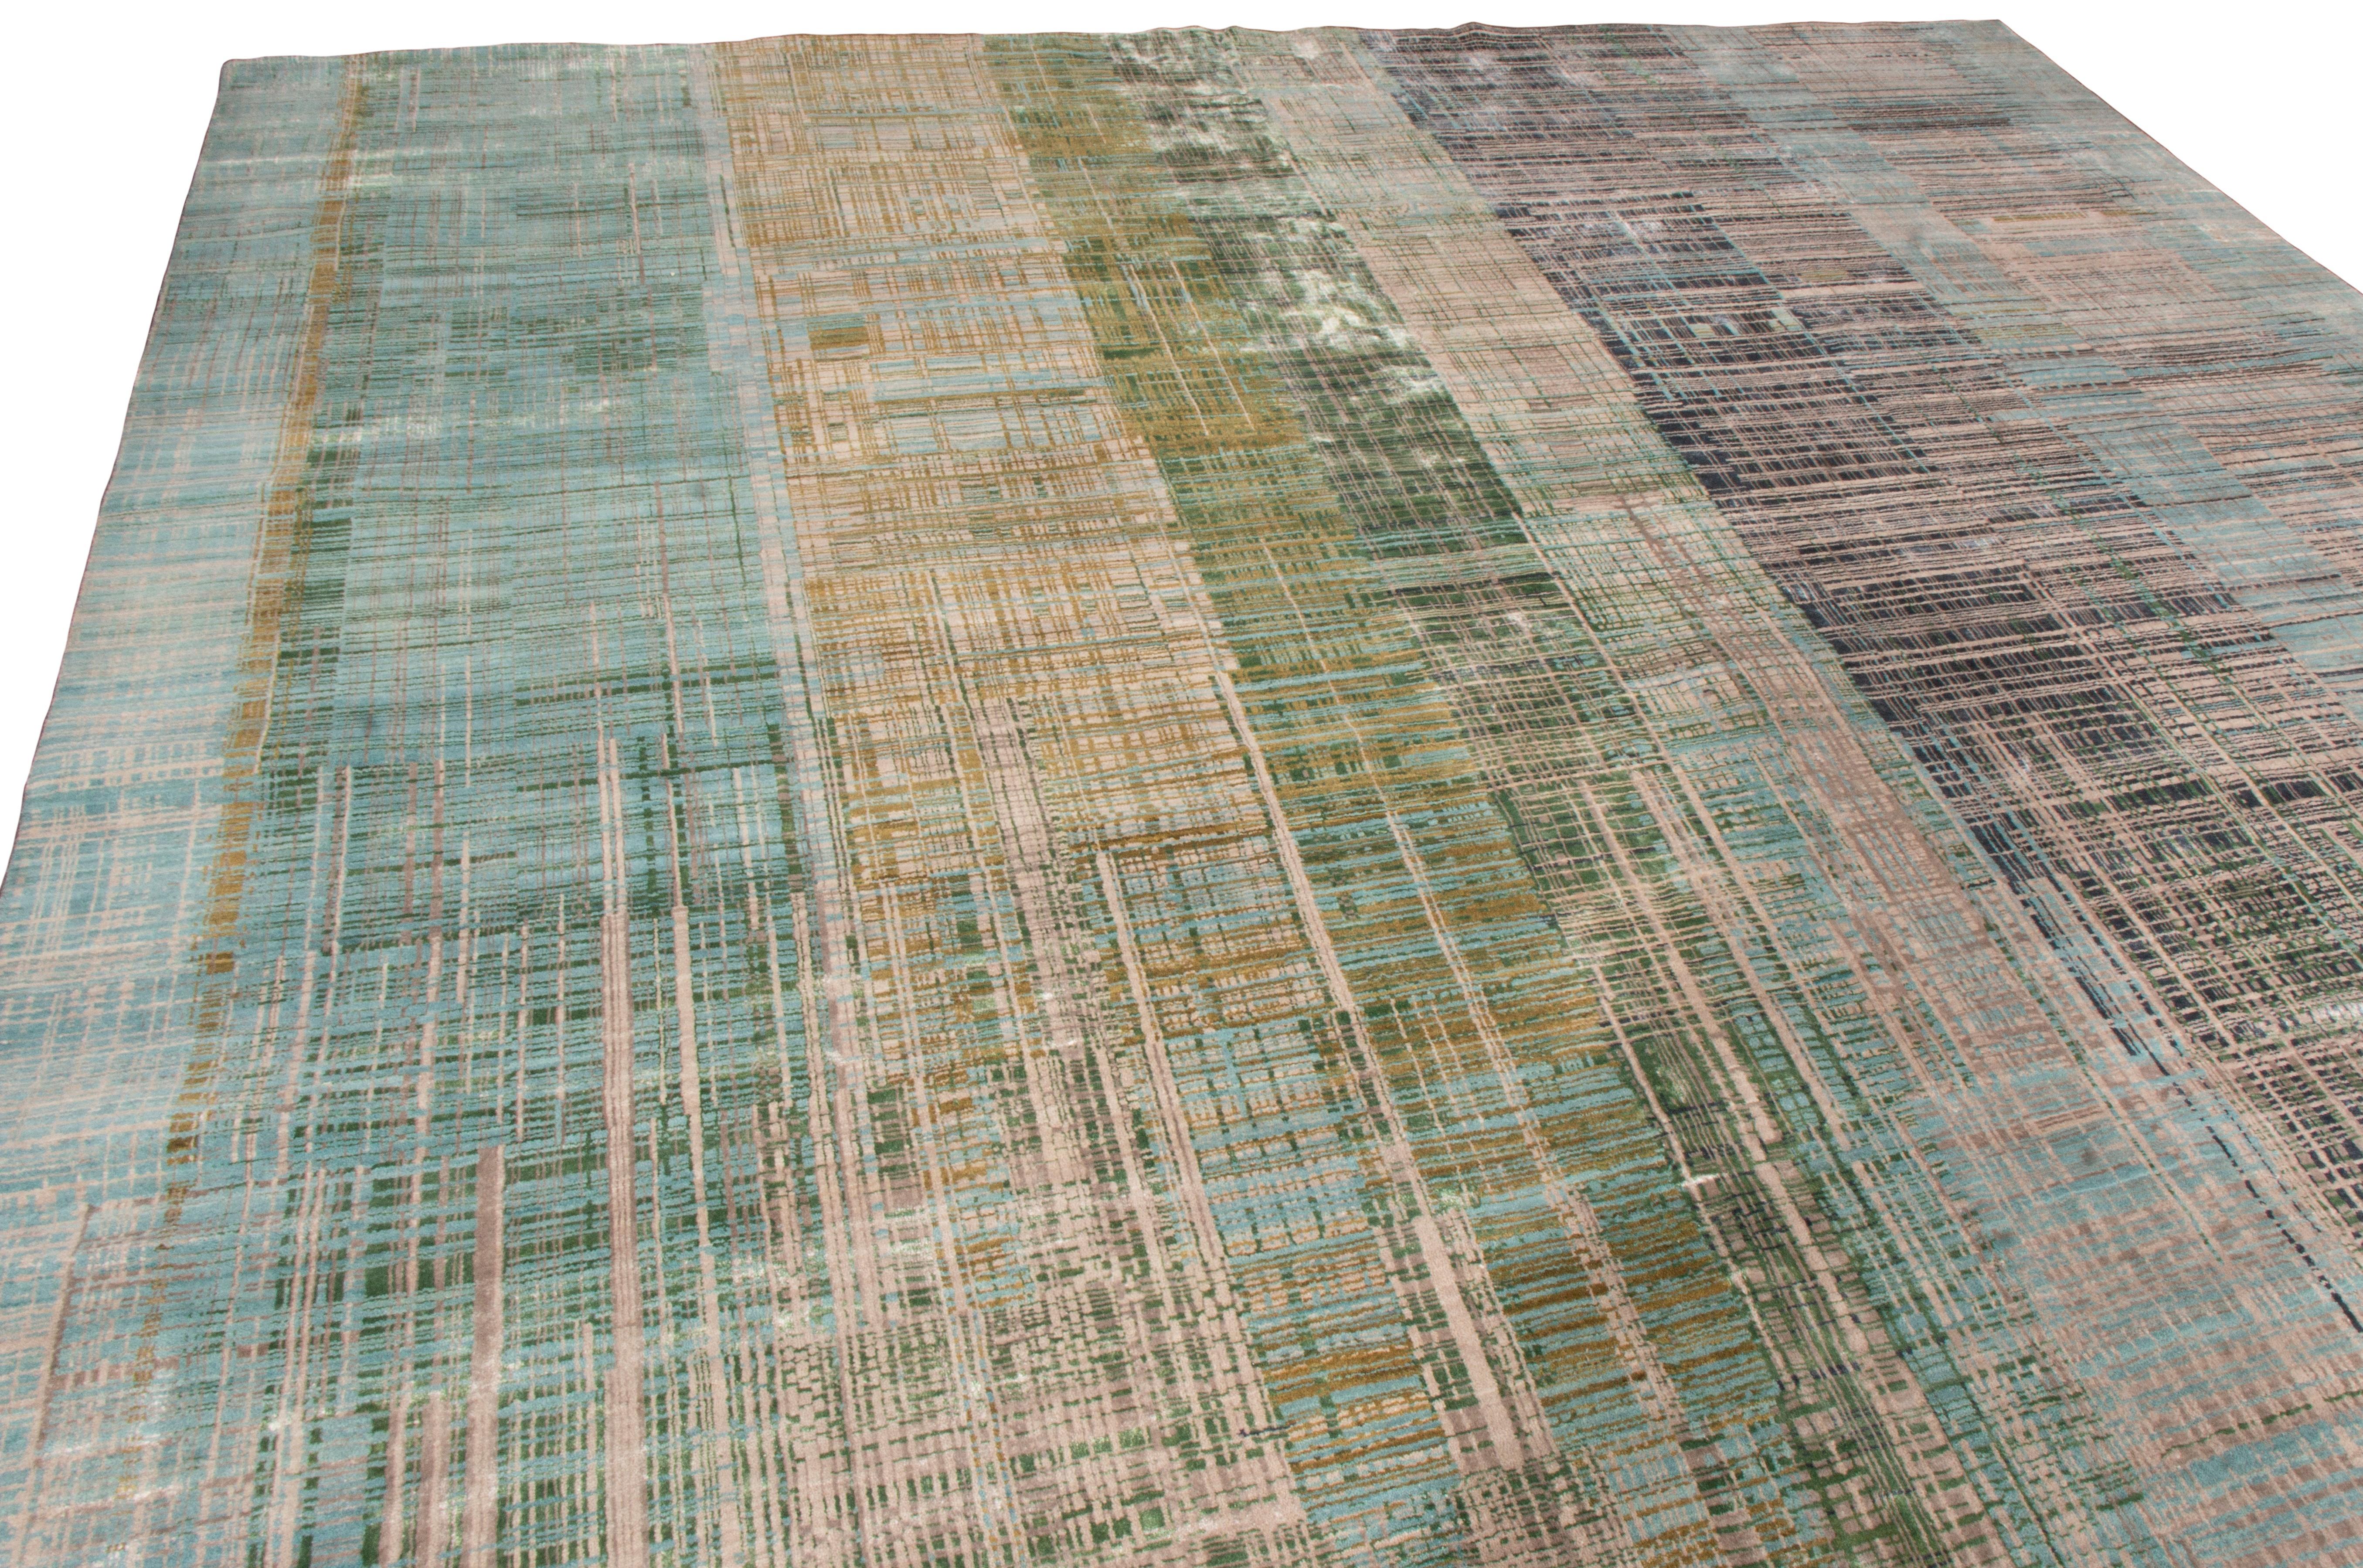 Originating from India, this contemporary geometric wool rug is hand knotted in high quality wool with a unique dual perspective to its colorways. The dominant hues of green and blue throughout the finely woven abstract scratch patterns also radiate